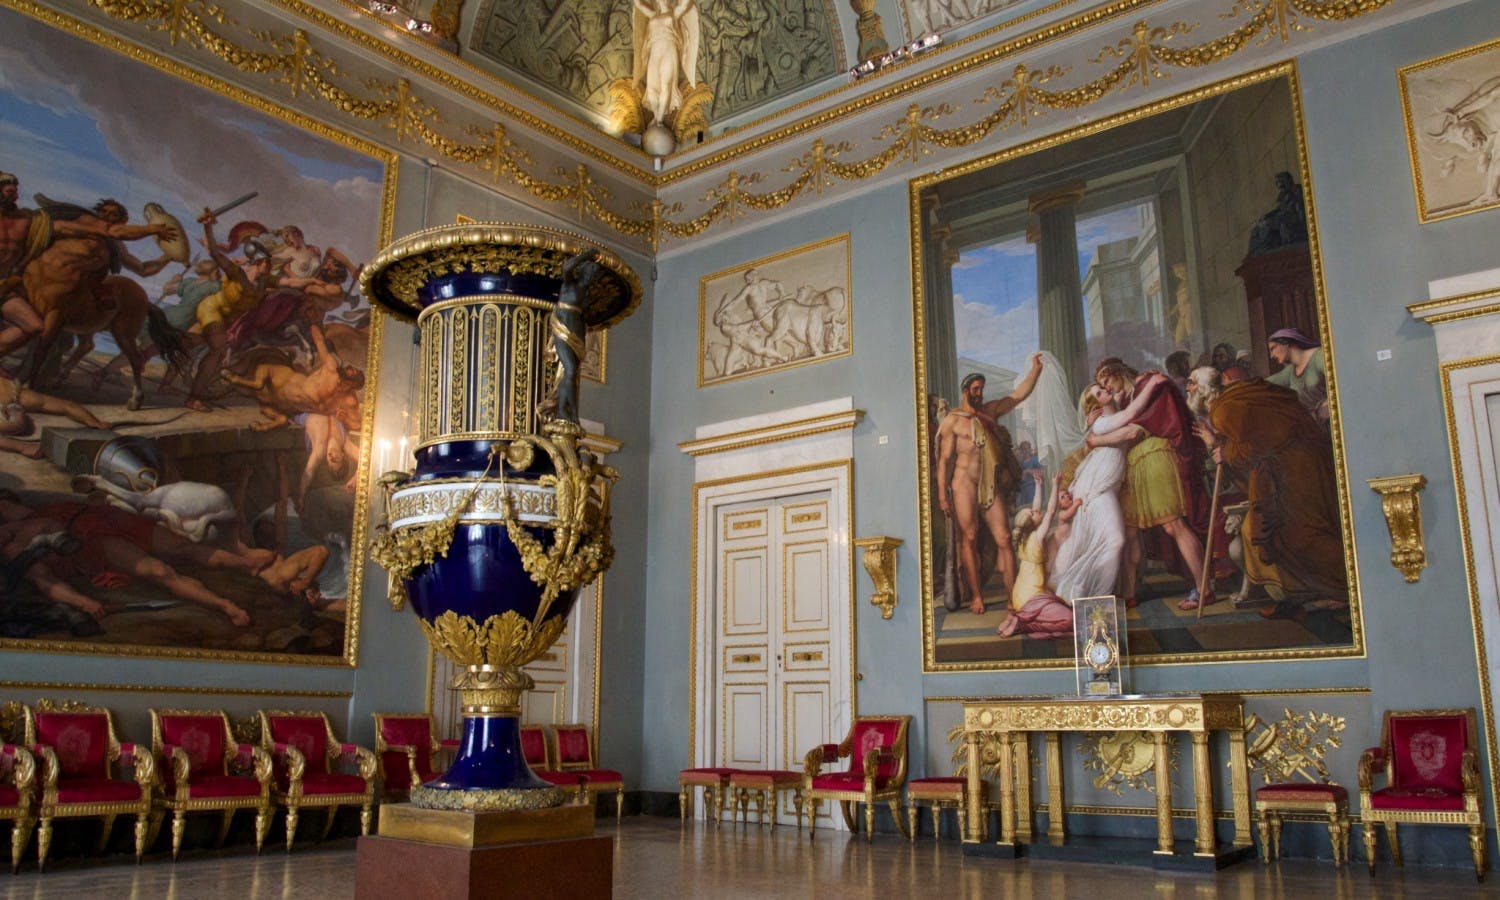 Palatine Gallery and Gallery of Modern Art: Tickets for Palazzo Pitti Museums